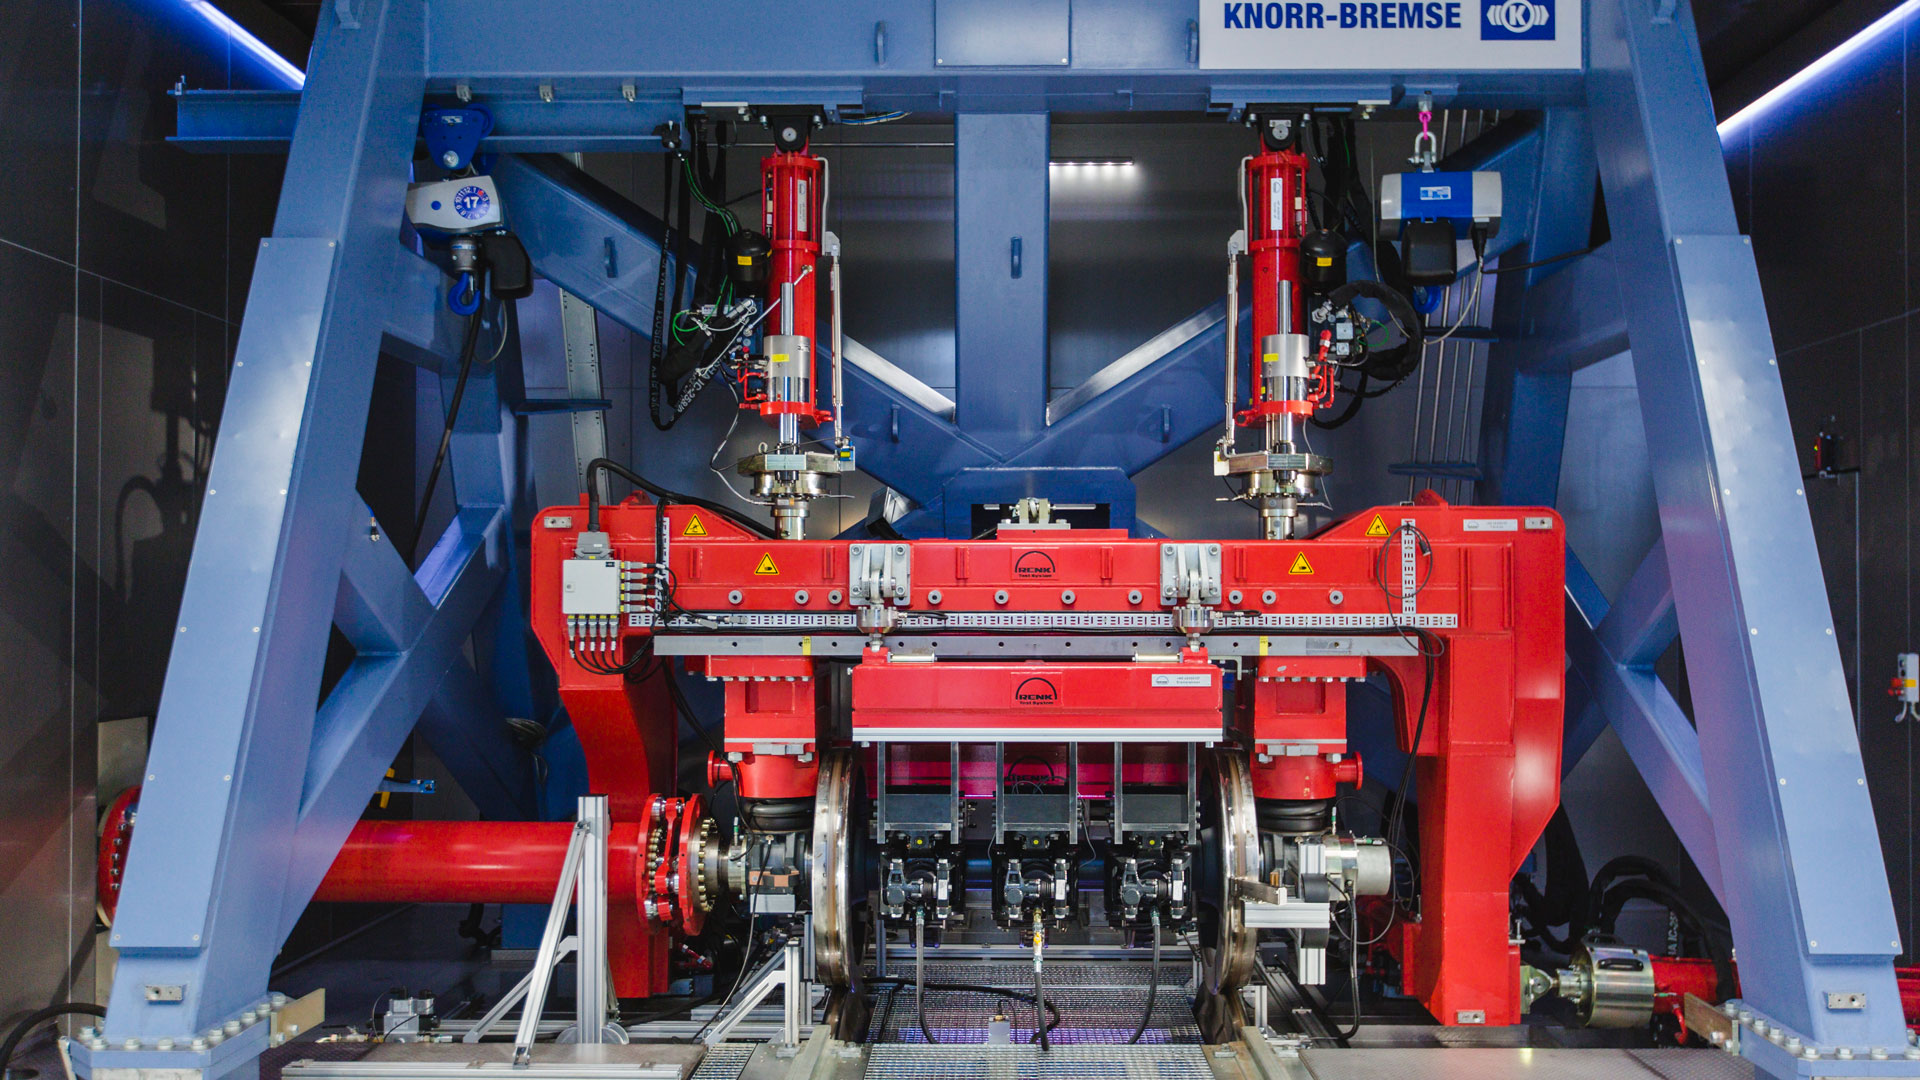 PIVOT2's project is currently testing its new pneumatic braking technology in a 15-metre high, 760 tonne test rig called ATLAS that can reach speeds up to 350 km/h. Image credit - Knorr-Bremse 